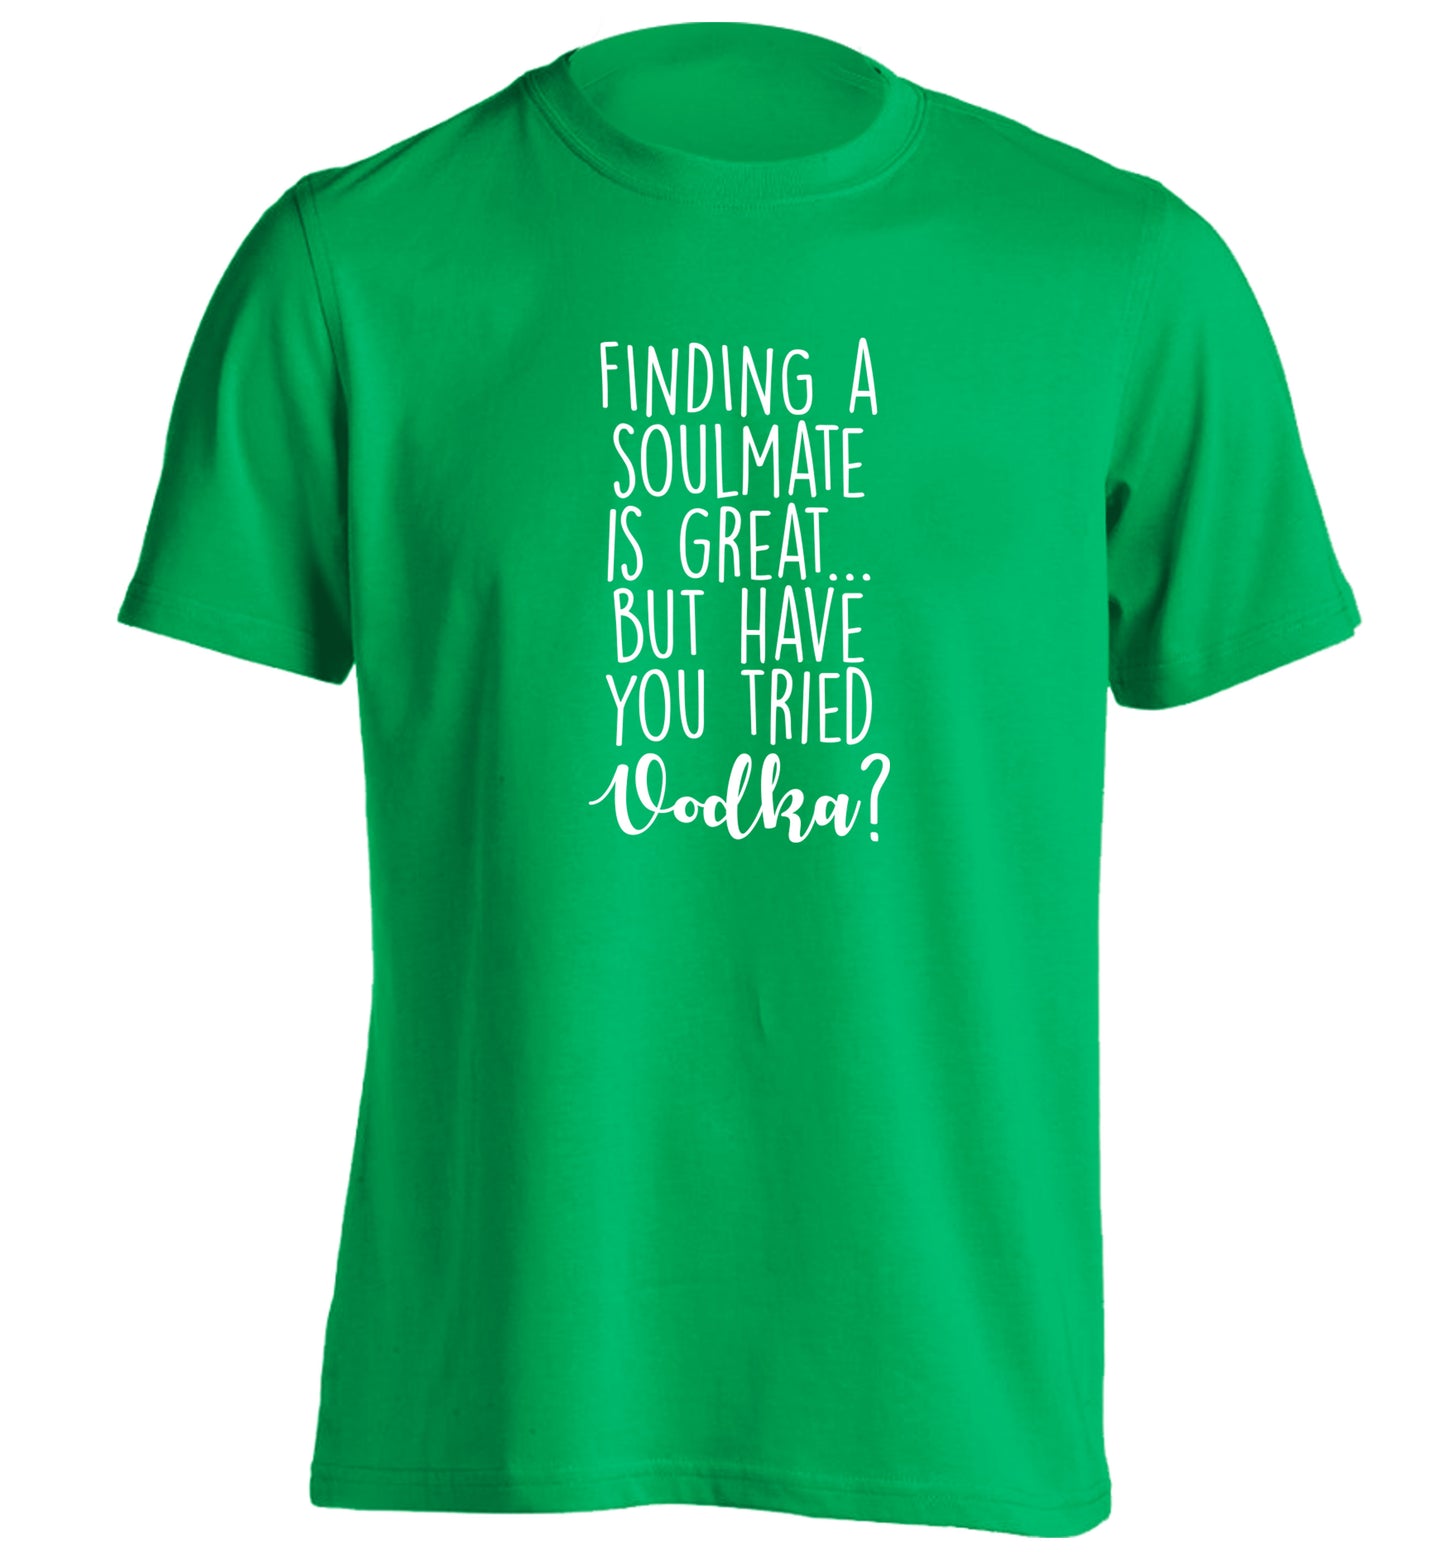 Finding a soulmate is great but have you tried vodka? adults unisex green Tshirt 2XL